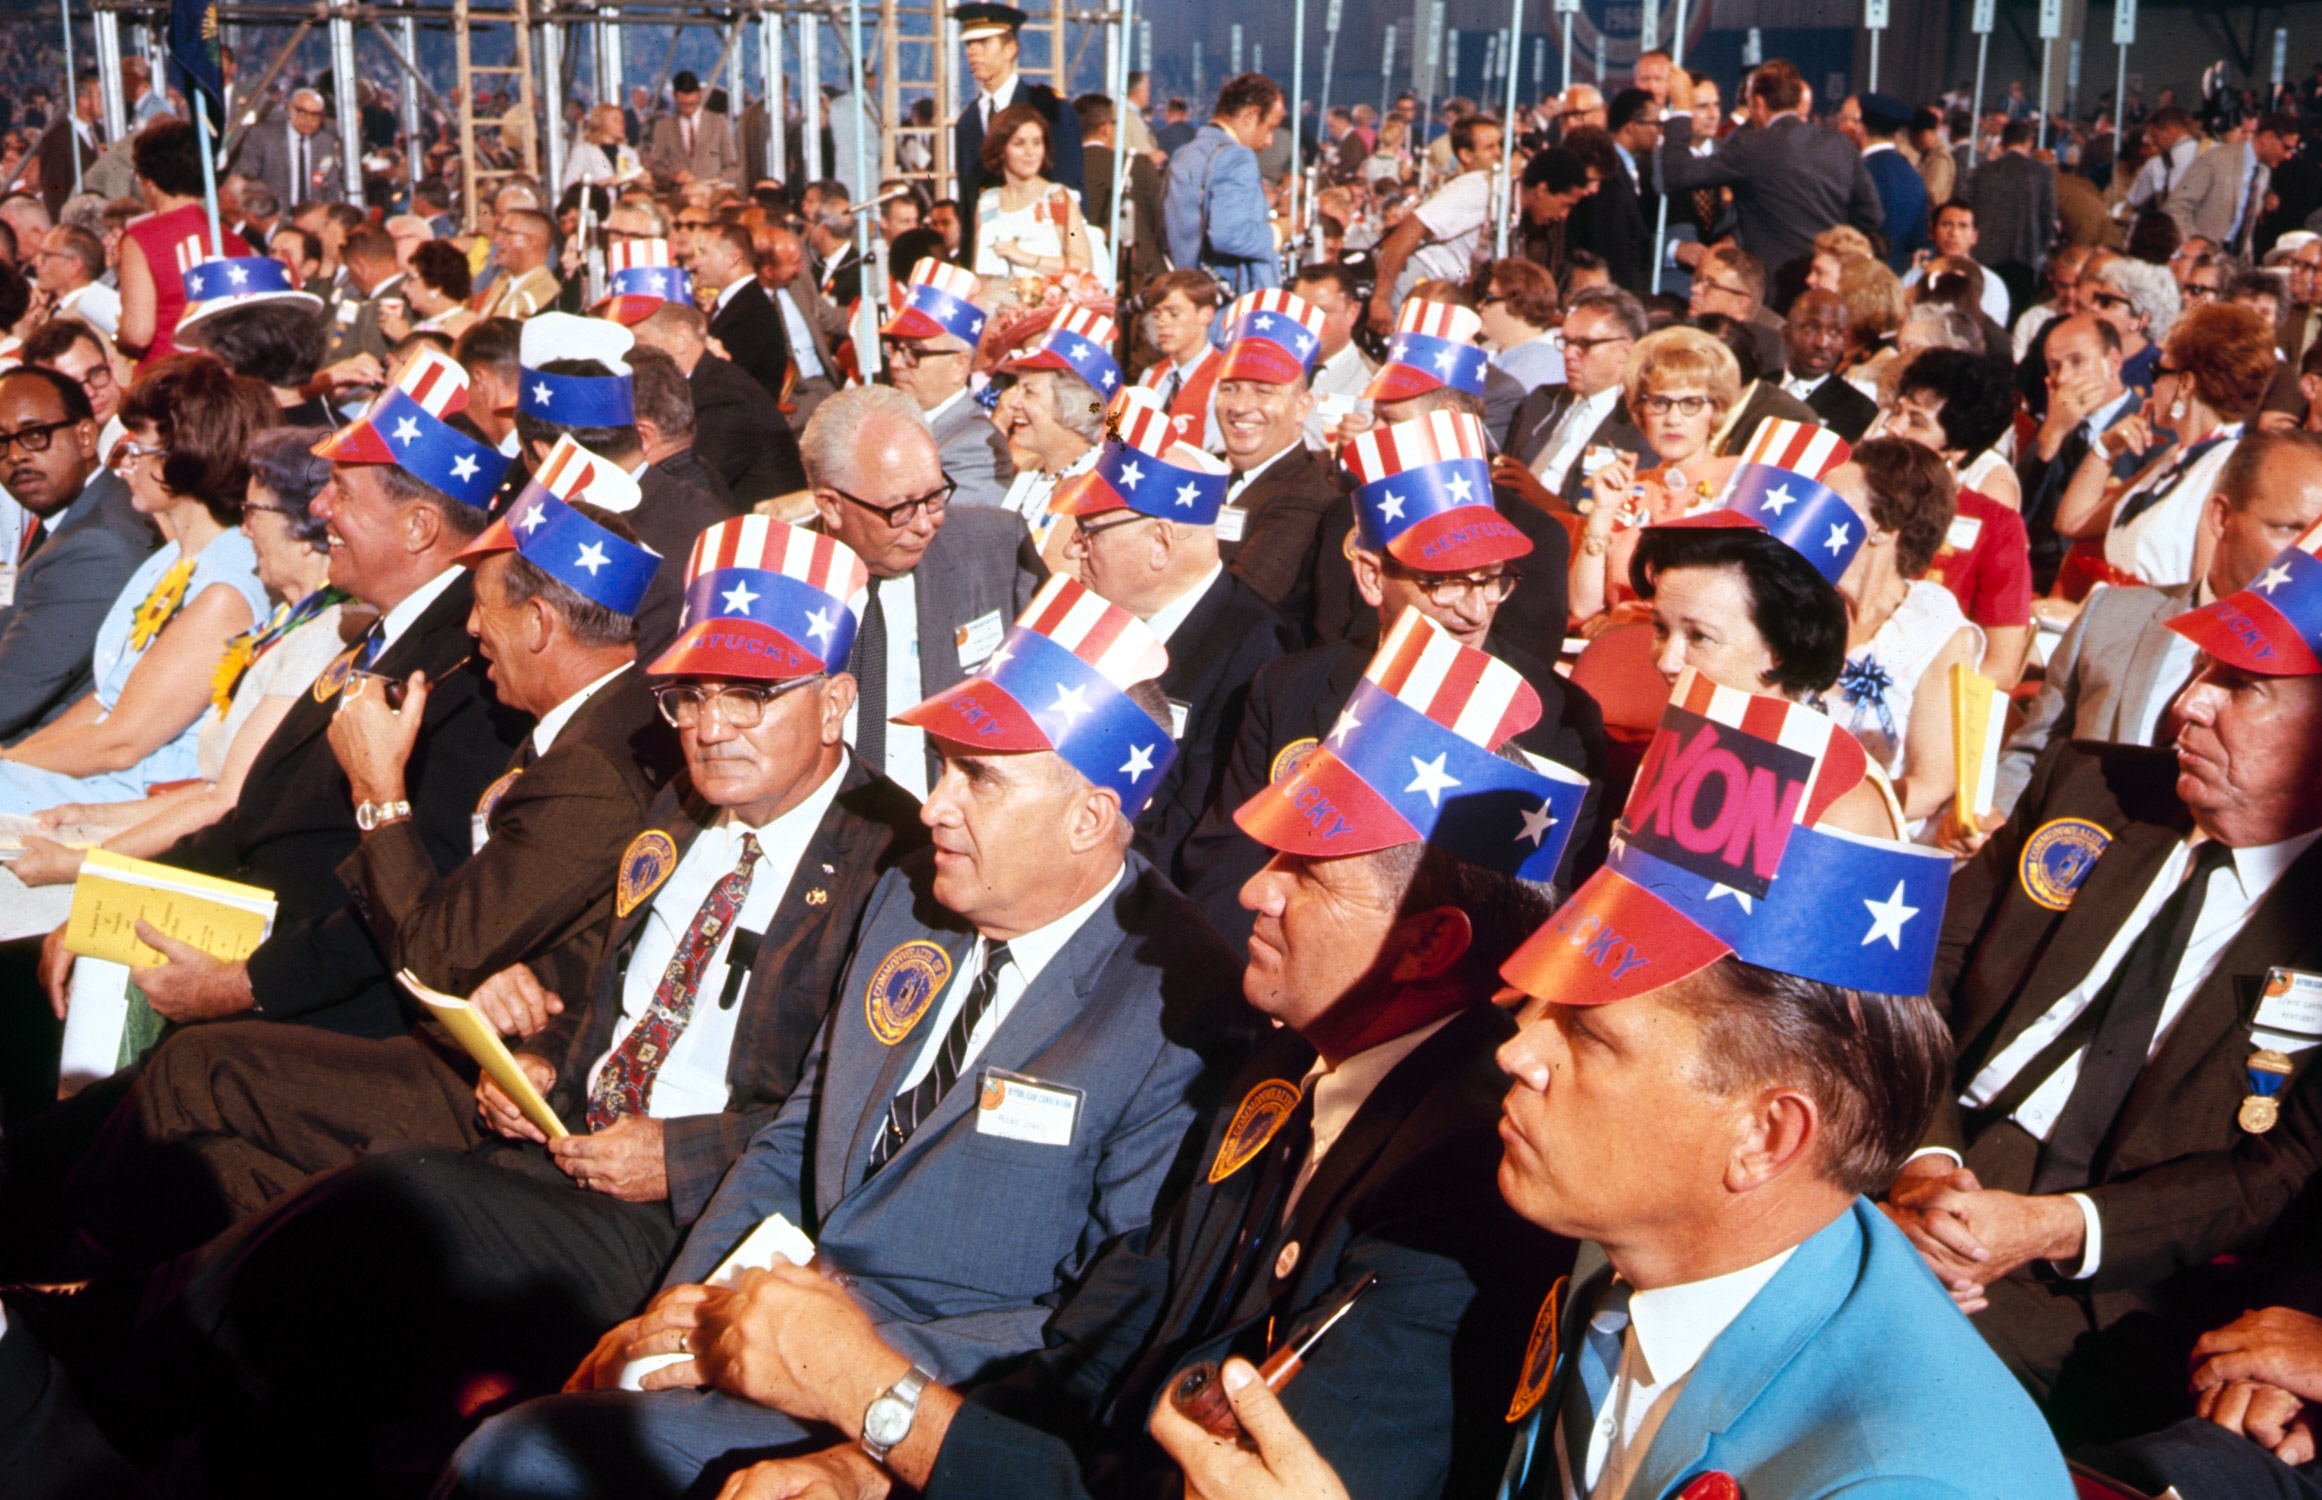 Richard Nixon supporters at the Republican National Convention, 1968.